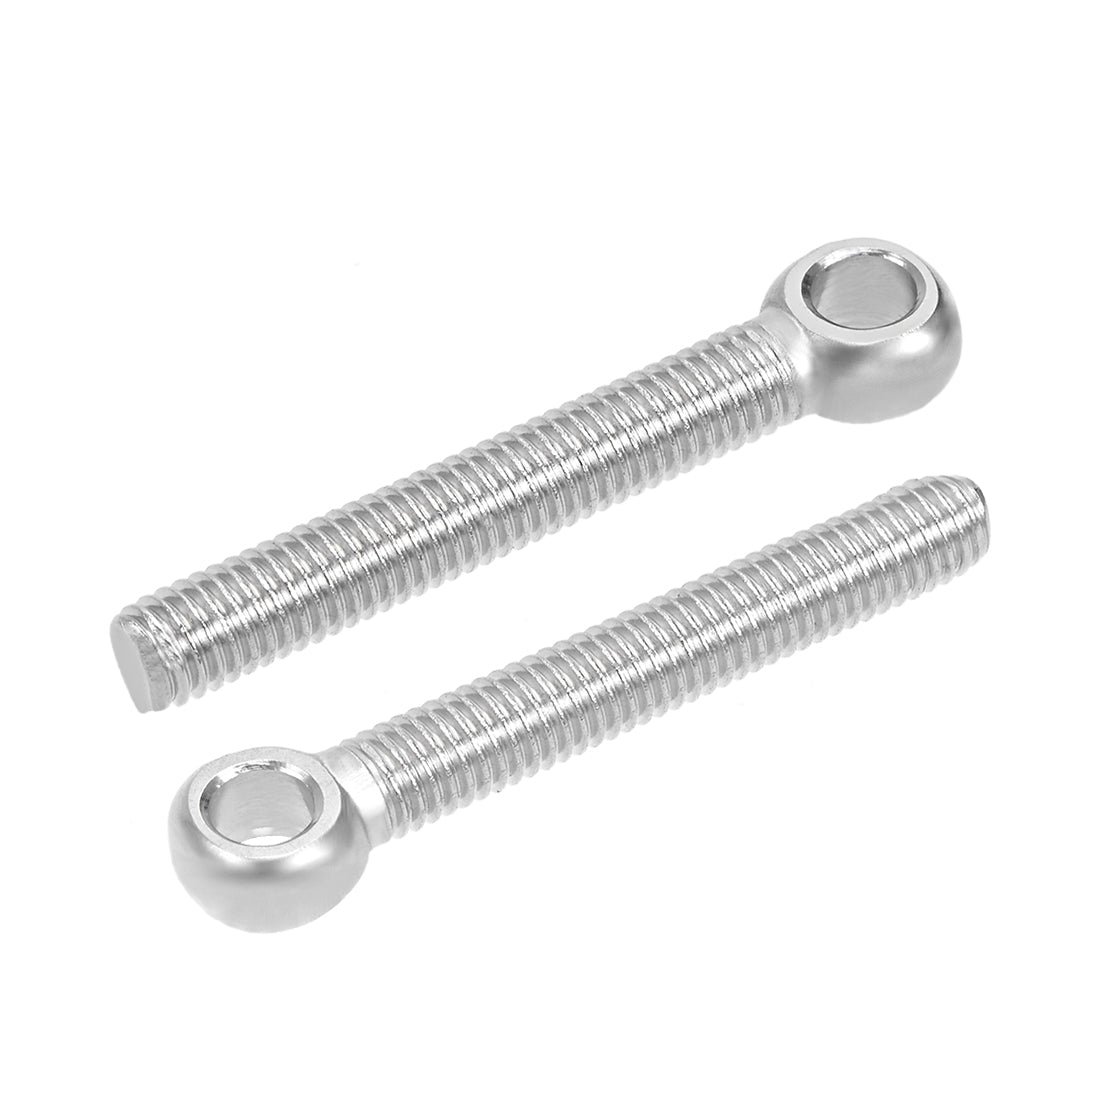 Uxcell Uxcell M5 x 35mm 304 Stainless Steel Machine Shoulder Lift Eye Bolt Rigging 20pcs